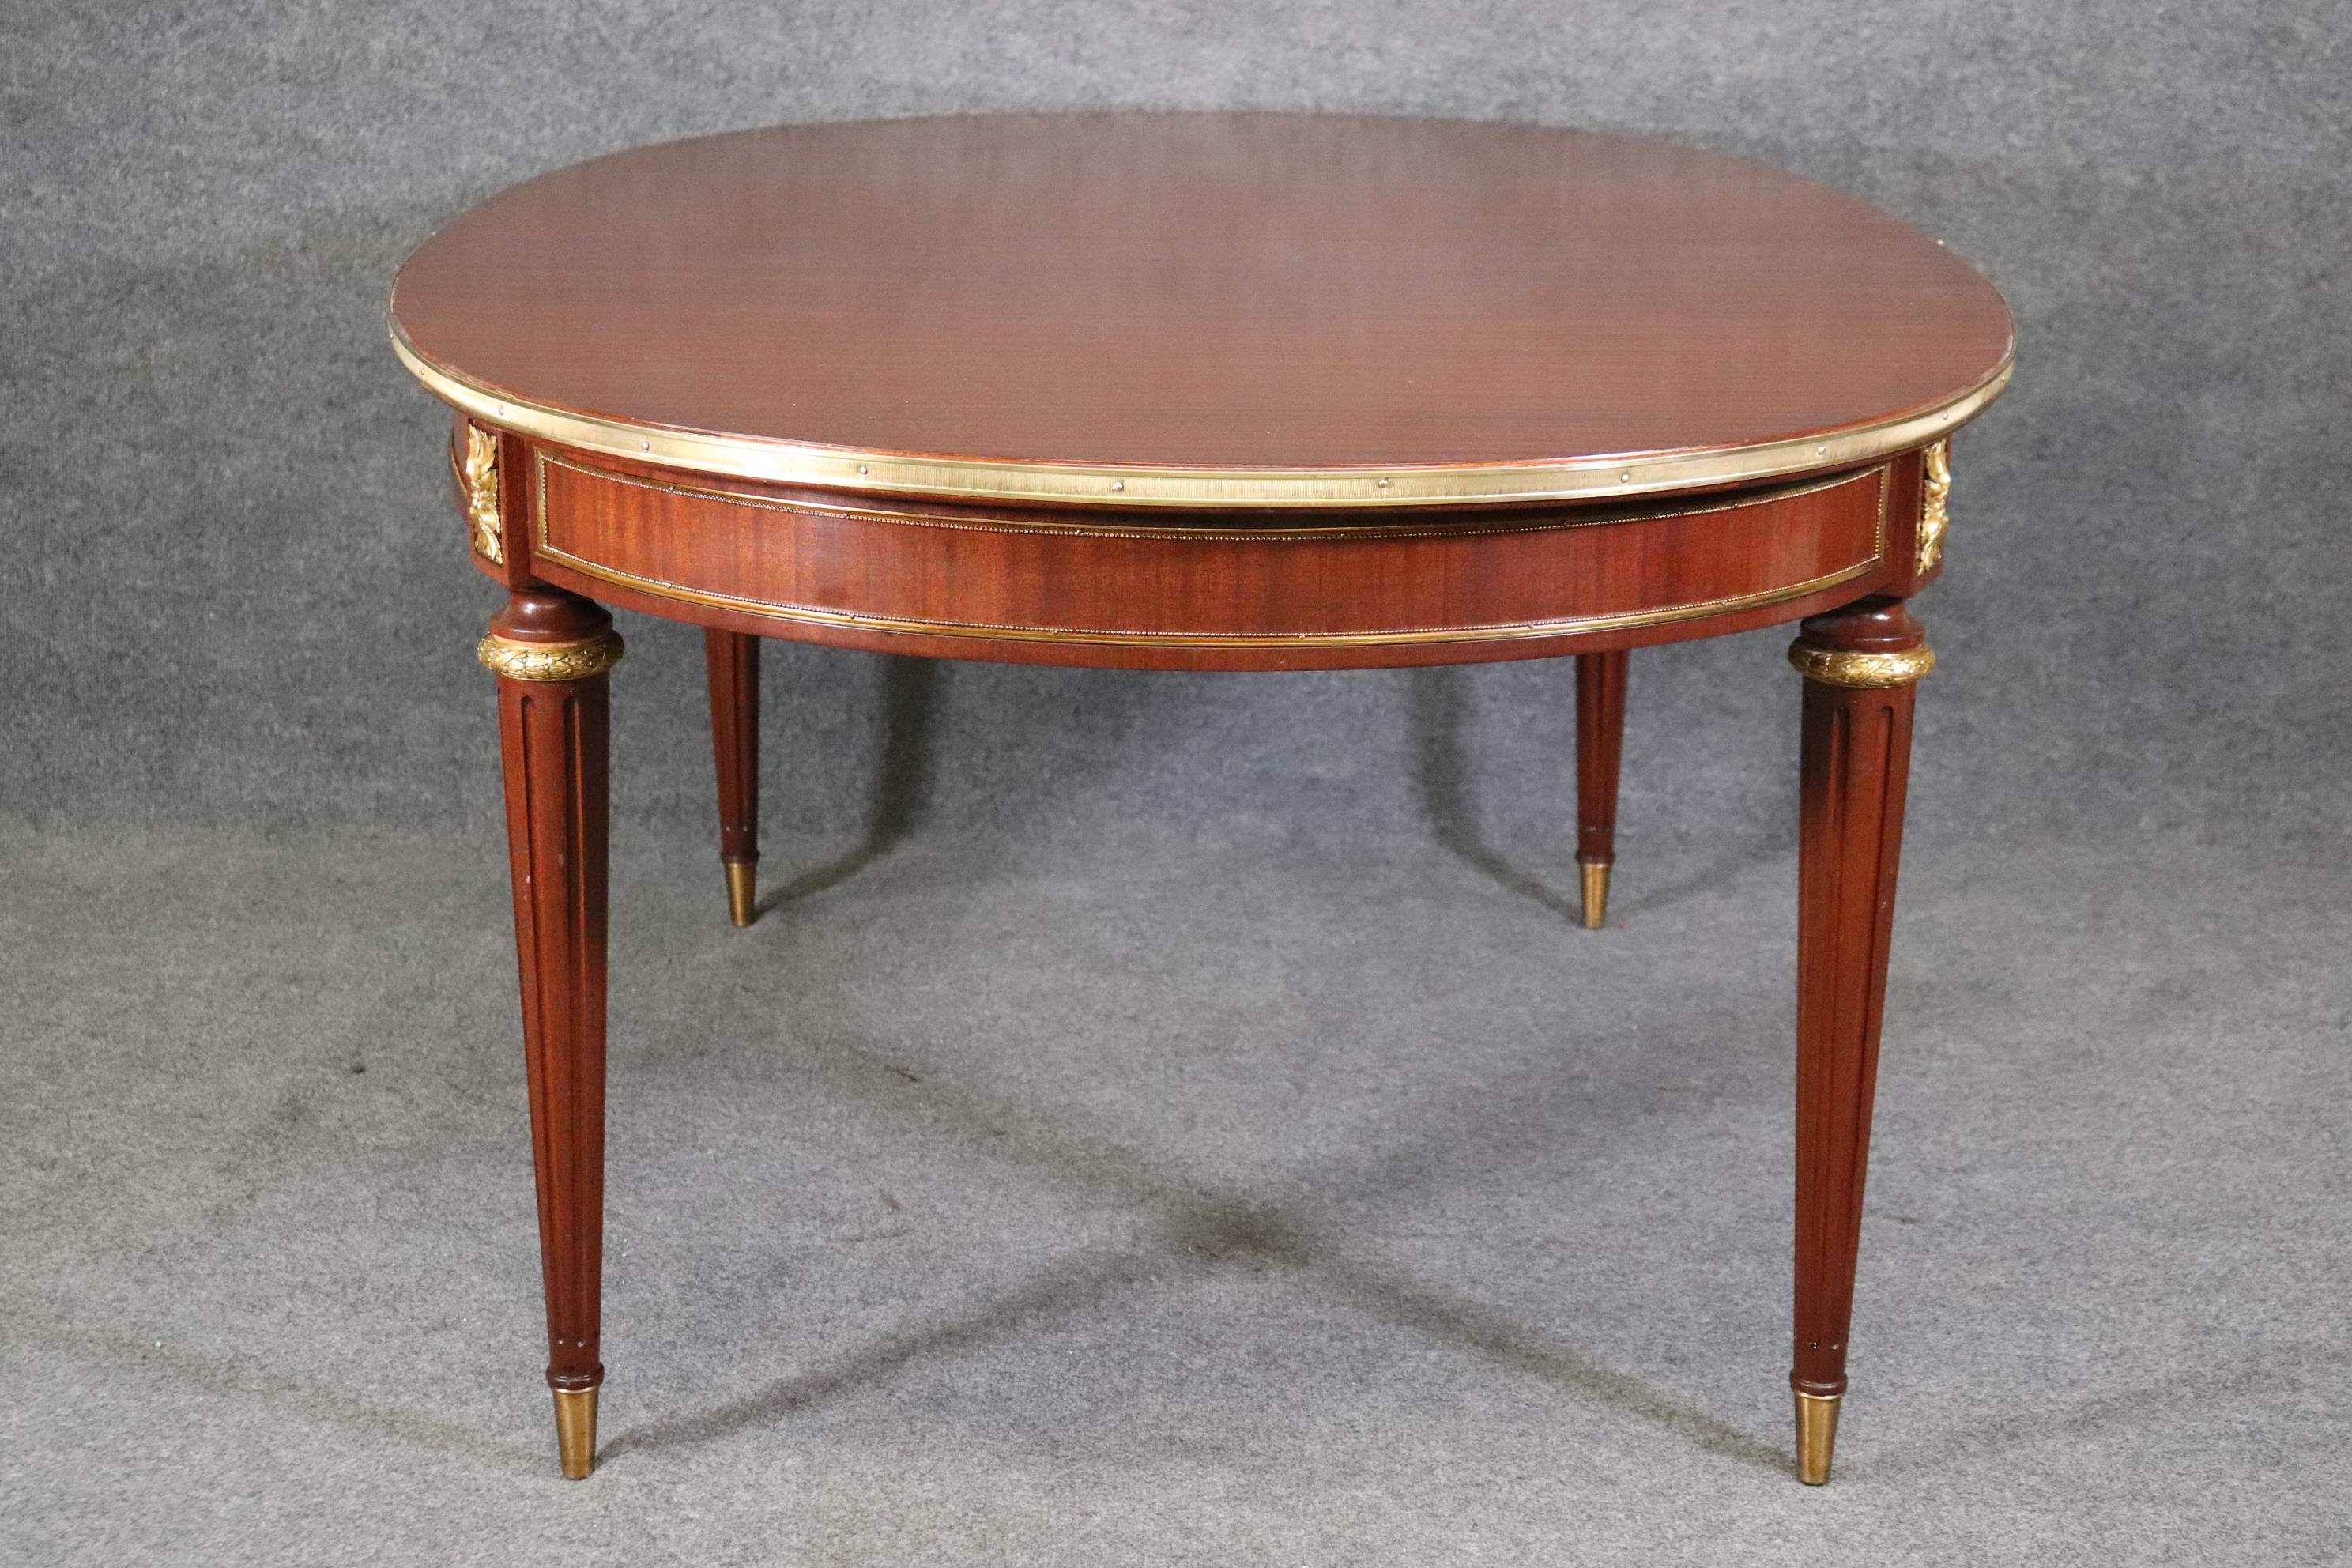 Maison Jansen Louis XVI Style Mahogany Dining Table With Two Leaves  In Good Condition For Sale In Swedesboro, NJ